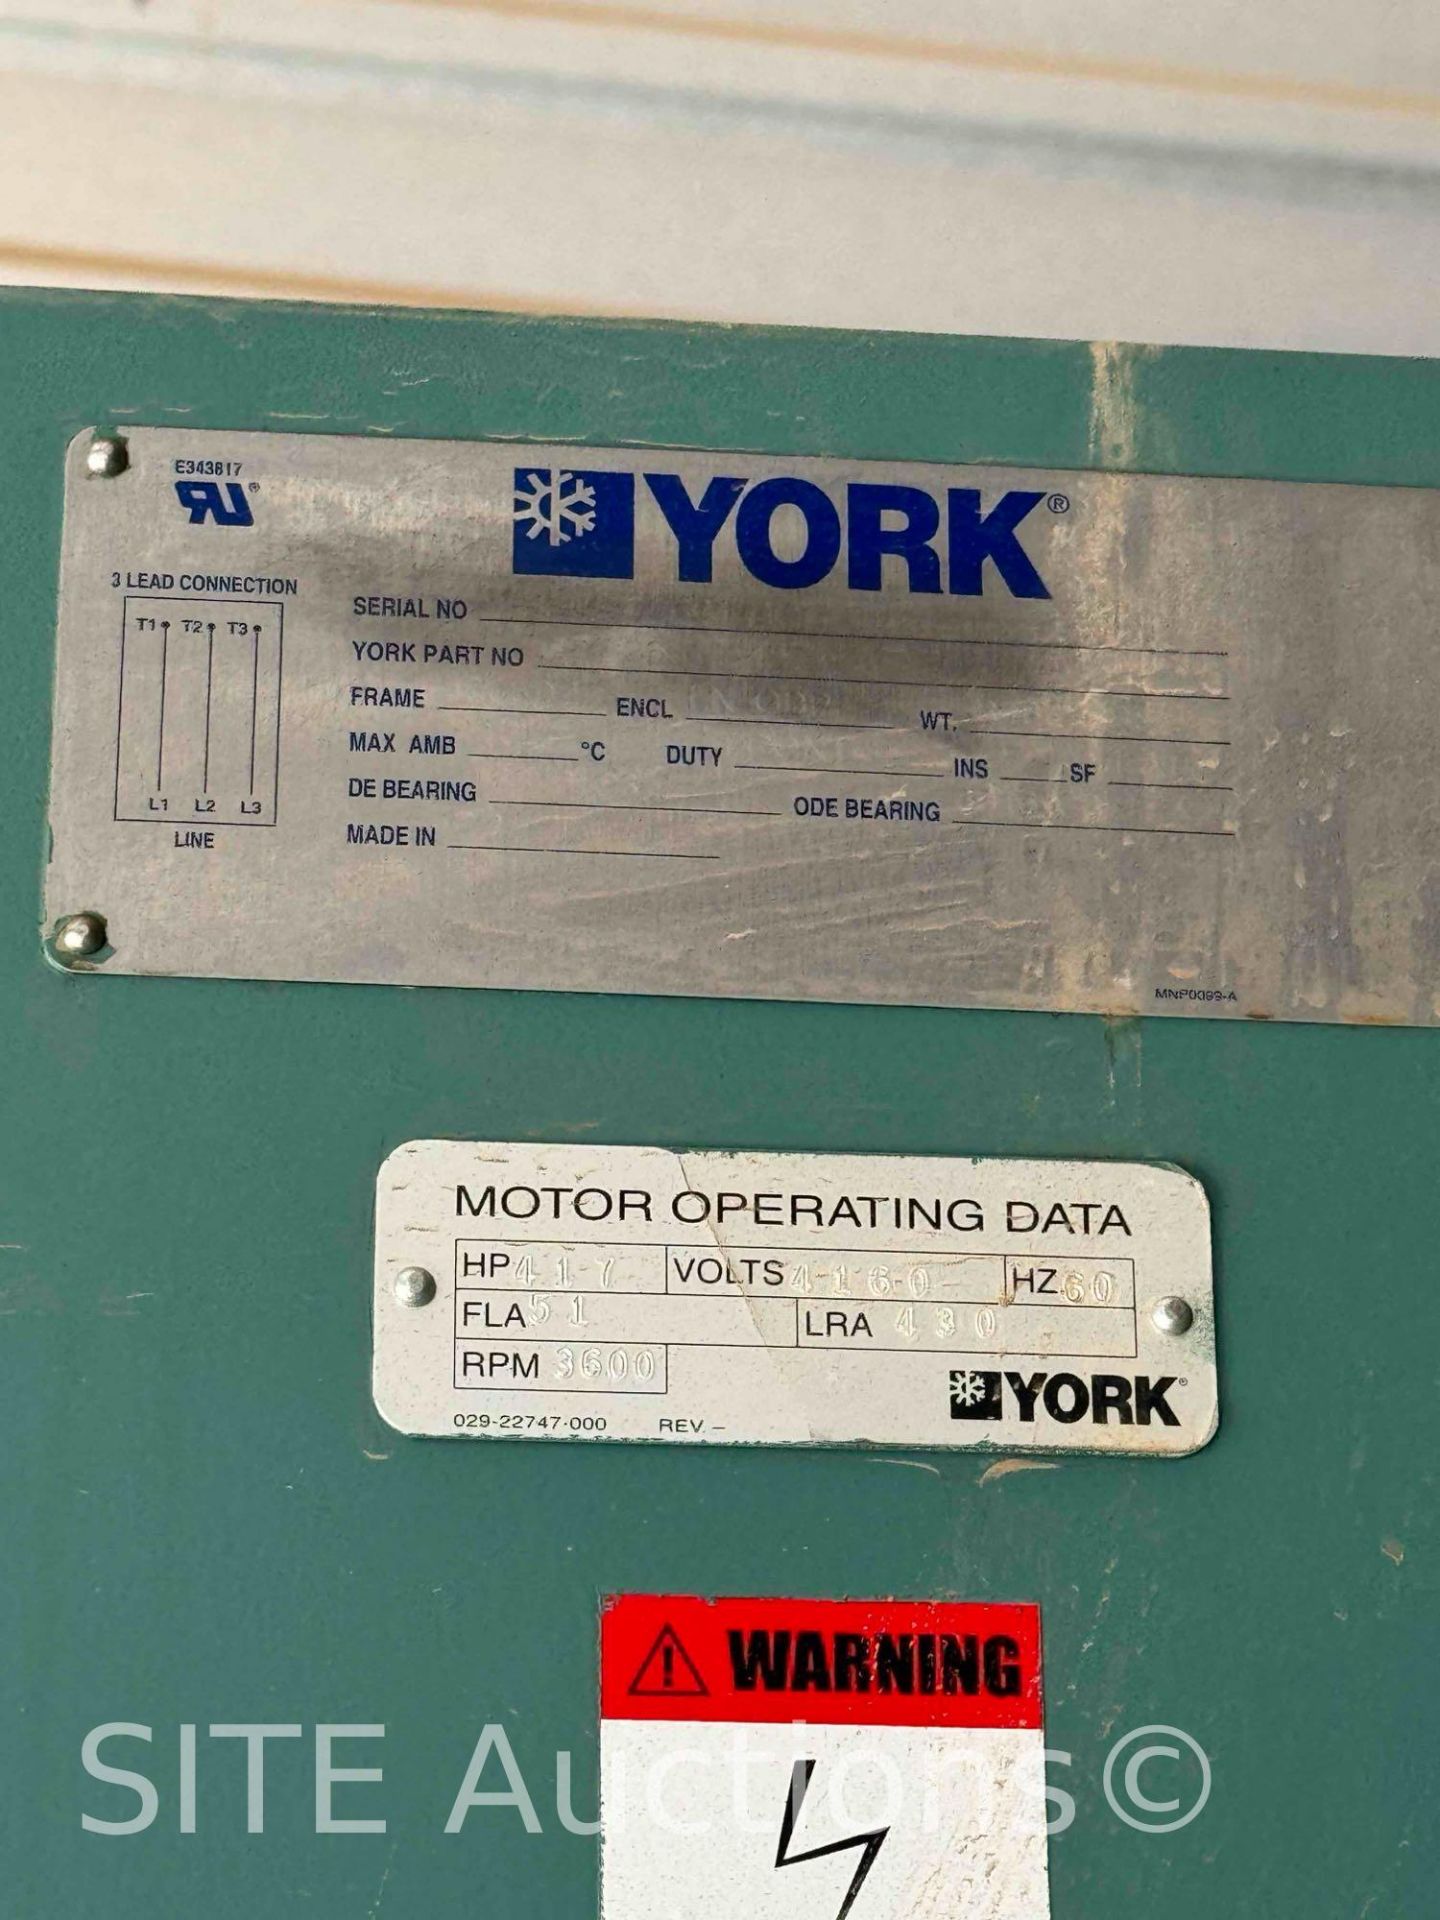 UNUSED 2012 York by Johnson Controls MaxE Centrifugal Chiller - Image 13 of 16